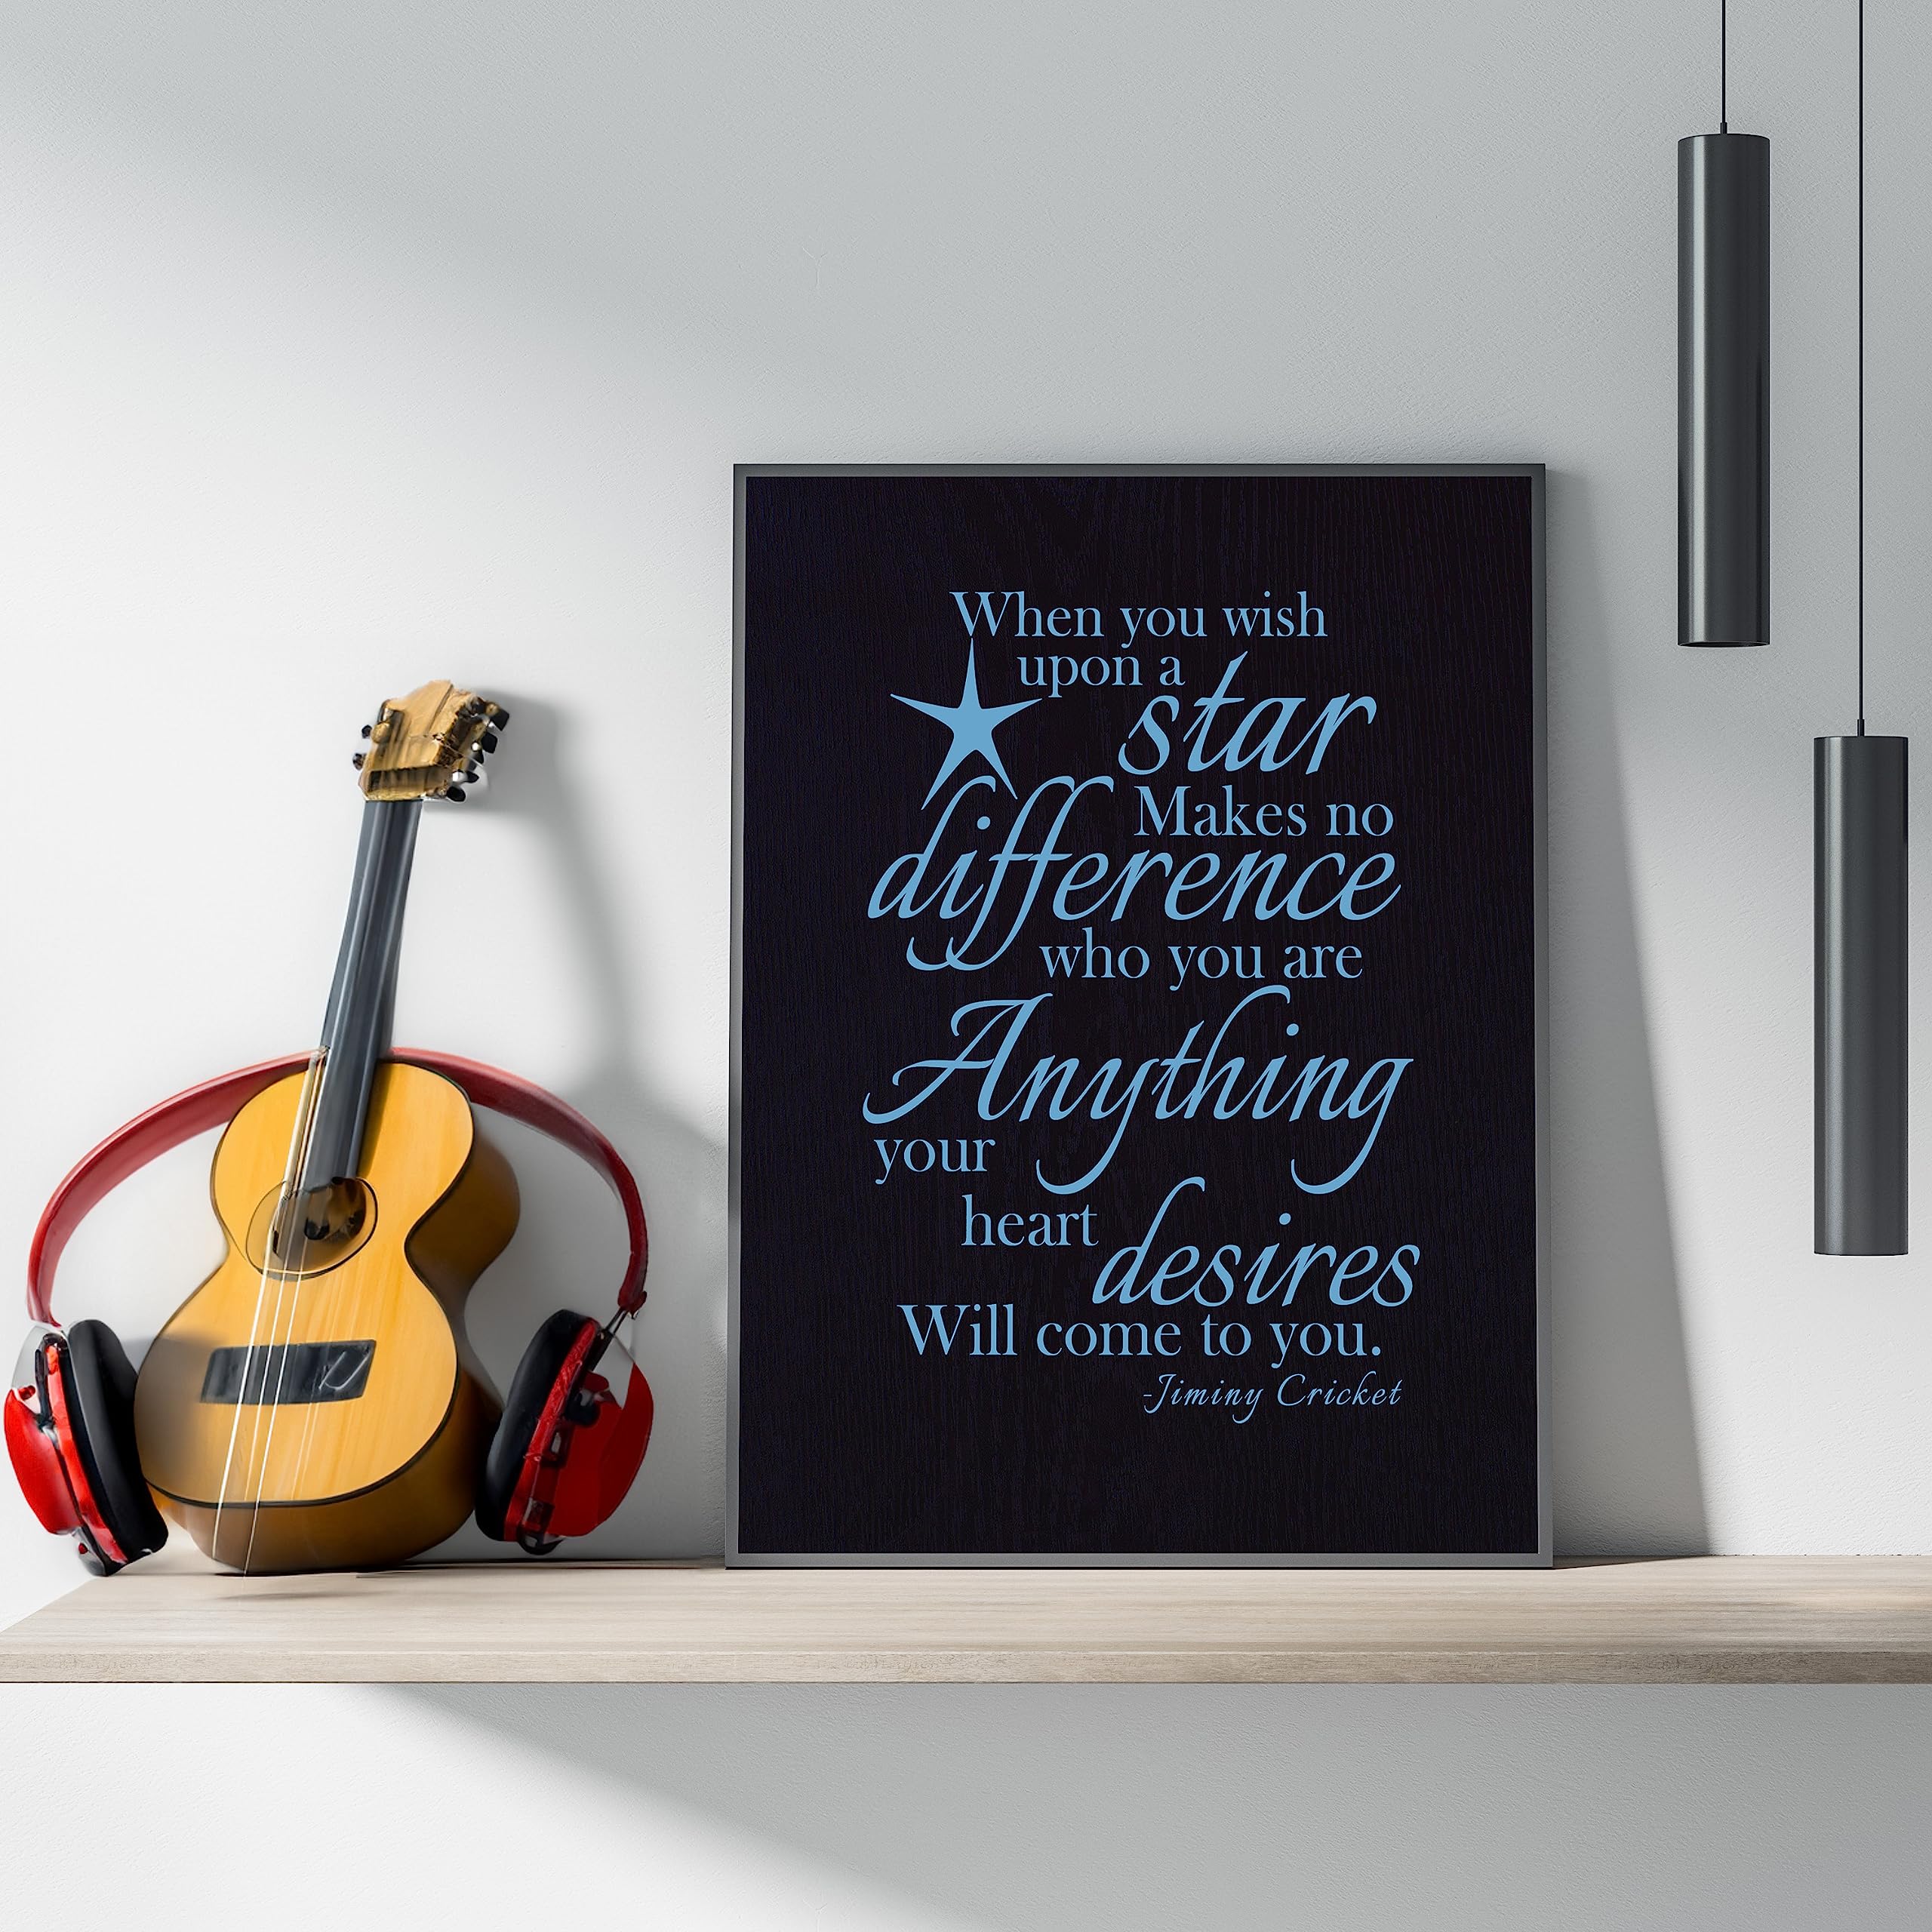 Jiminy Cricket Quote- When You Wish- Inspirational Wall Art Print, This Typographic Wall Decor Print Makes Ideal Wall Art Decor For Living Room, Office, Classroom & Inspiring Gift, Unframed-8x10”